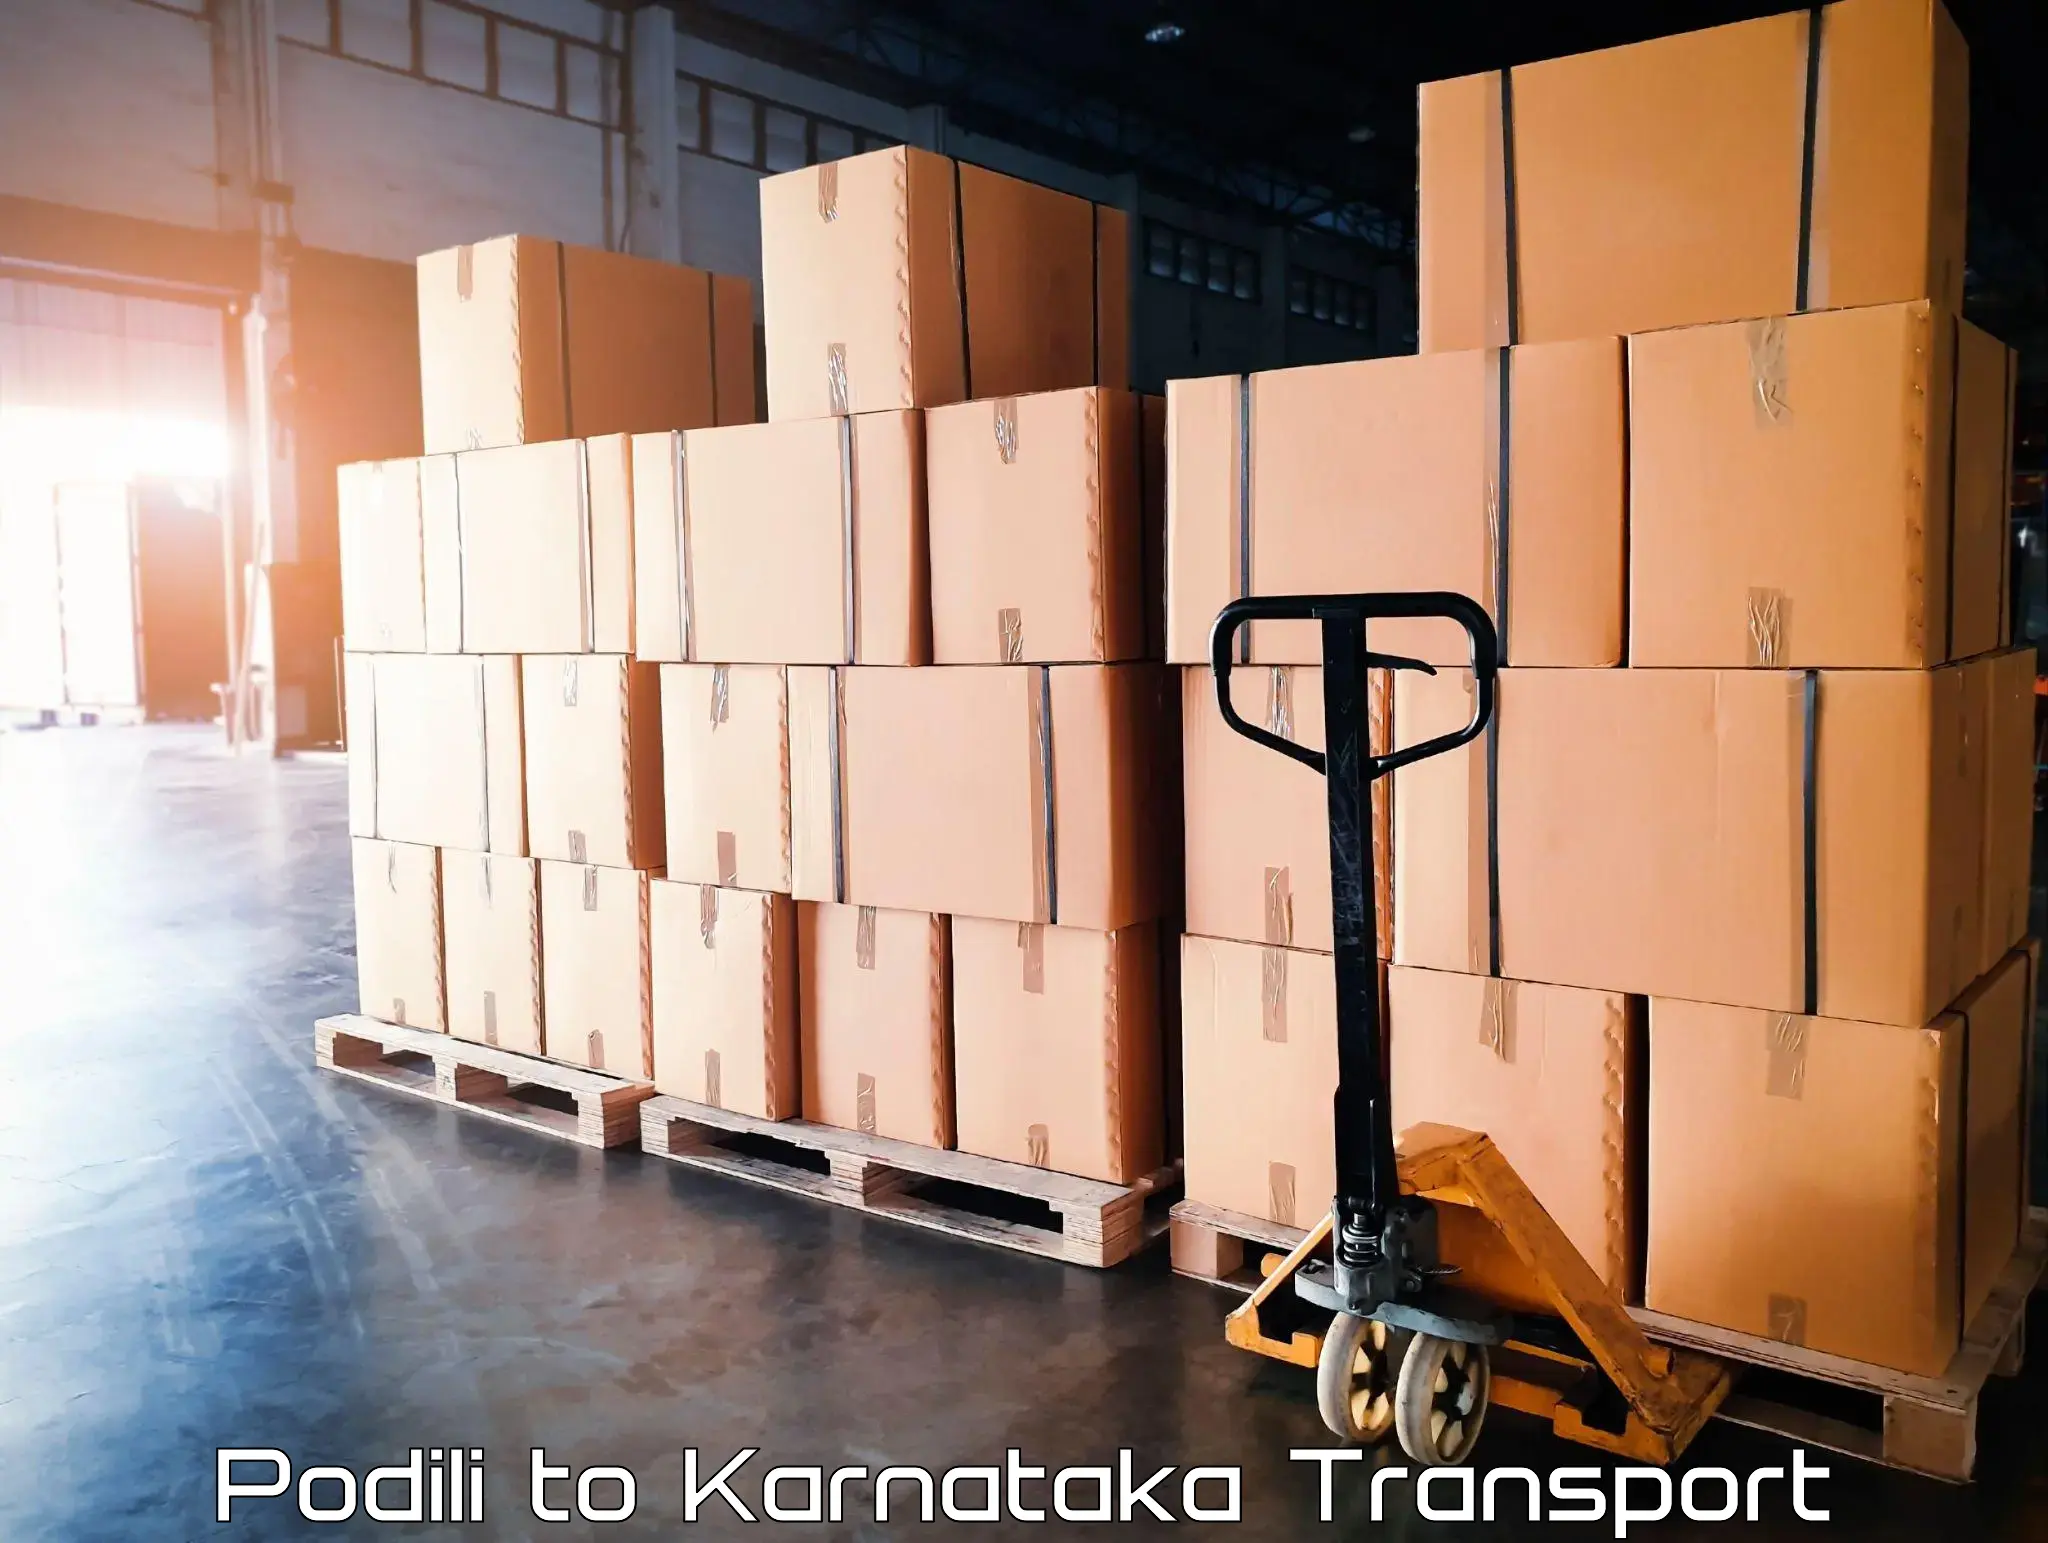 Two wheeler transport services Podili to Manipal